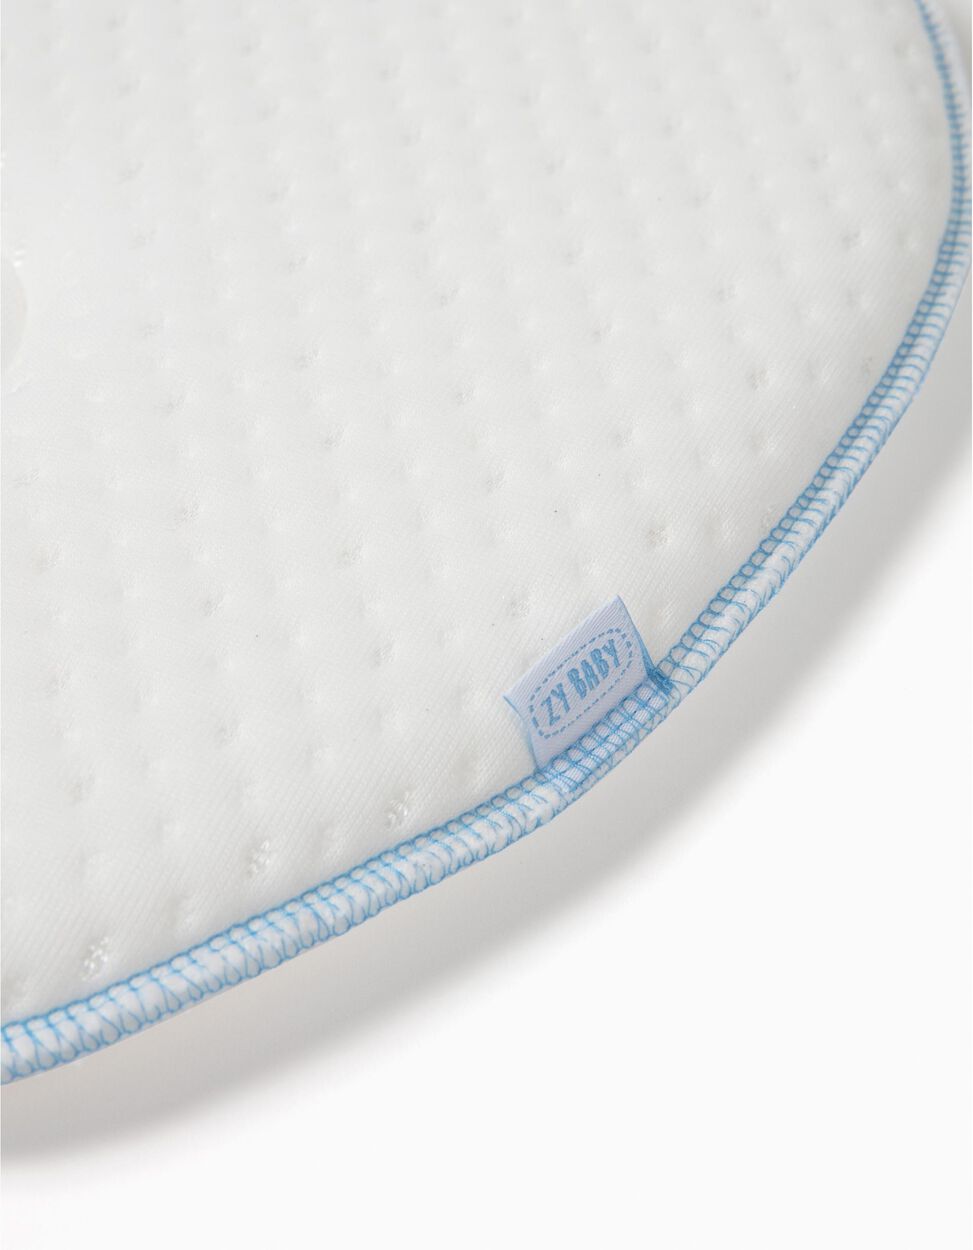 Ergo Pillow for Newborn Baby by Zy Baby